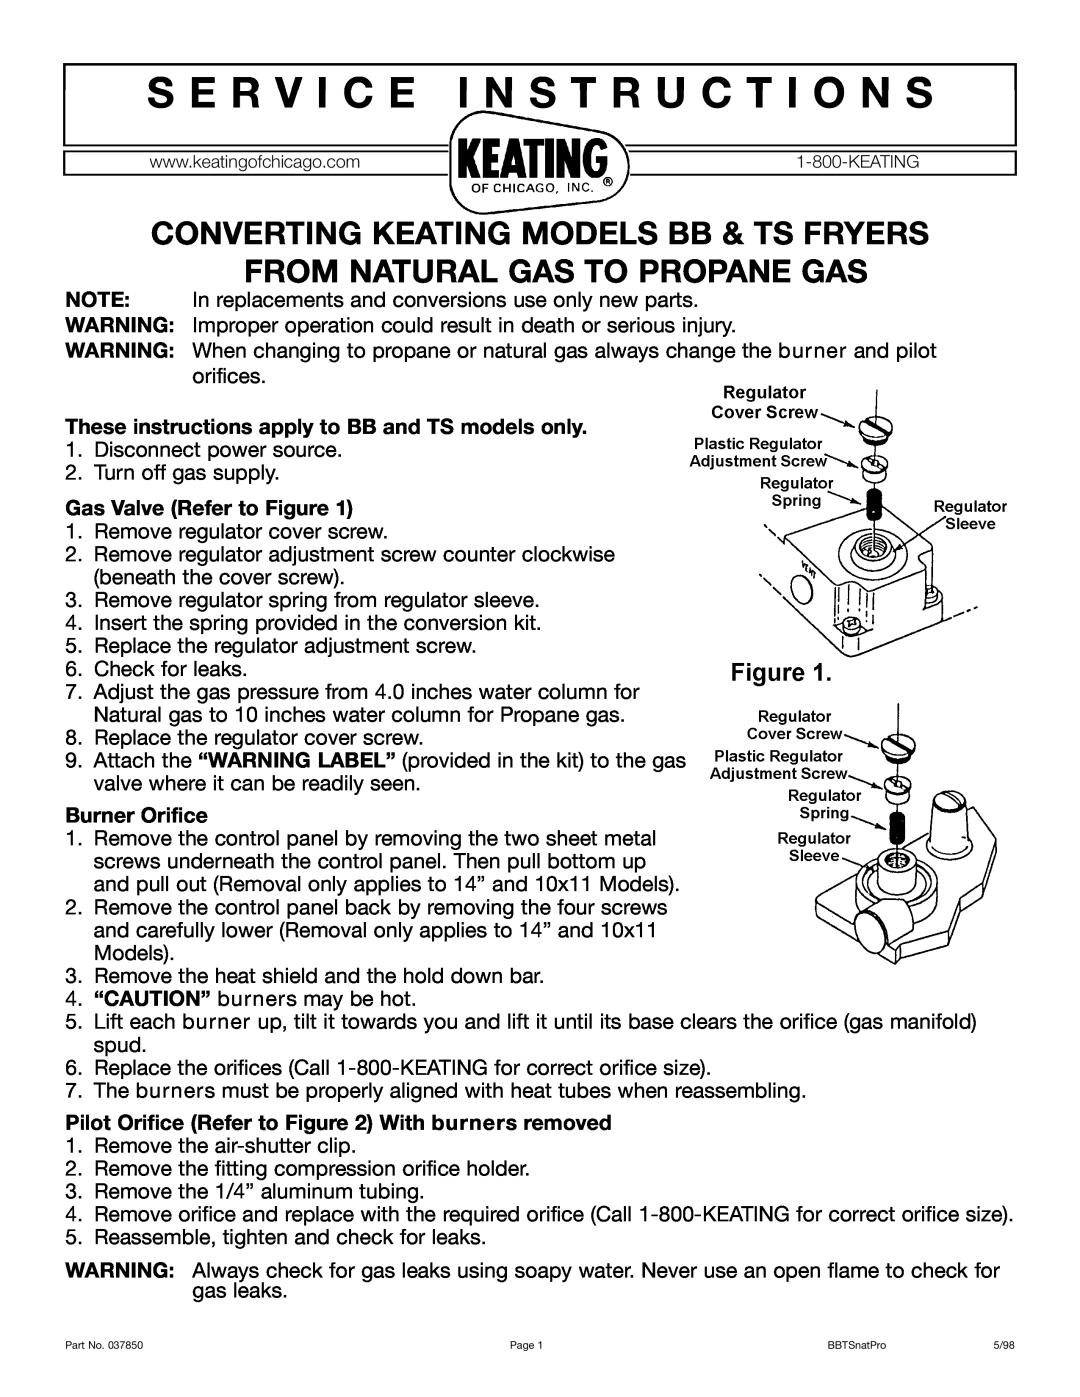 Keating Of Chicago manual S E R V I C E I N S T R U C T I O N S, These instructions apply to BB and TS models only 